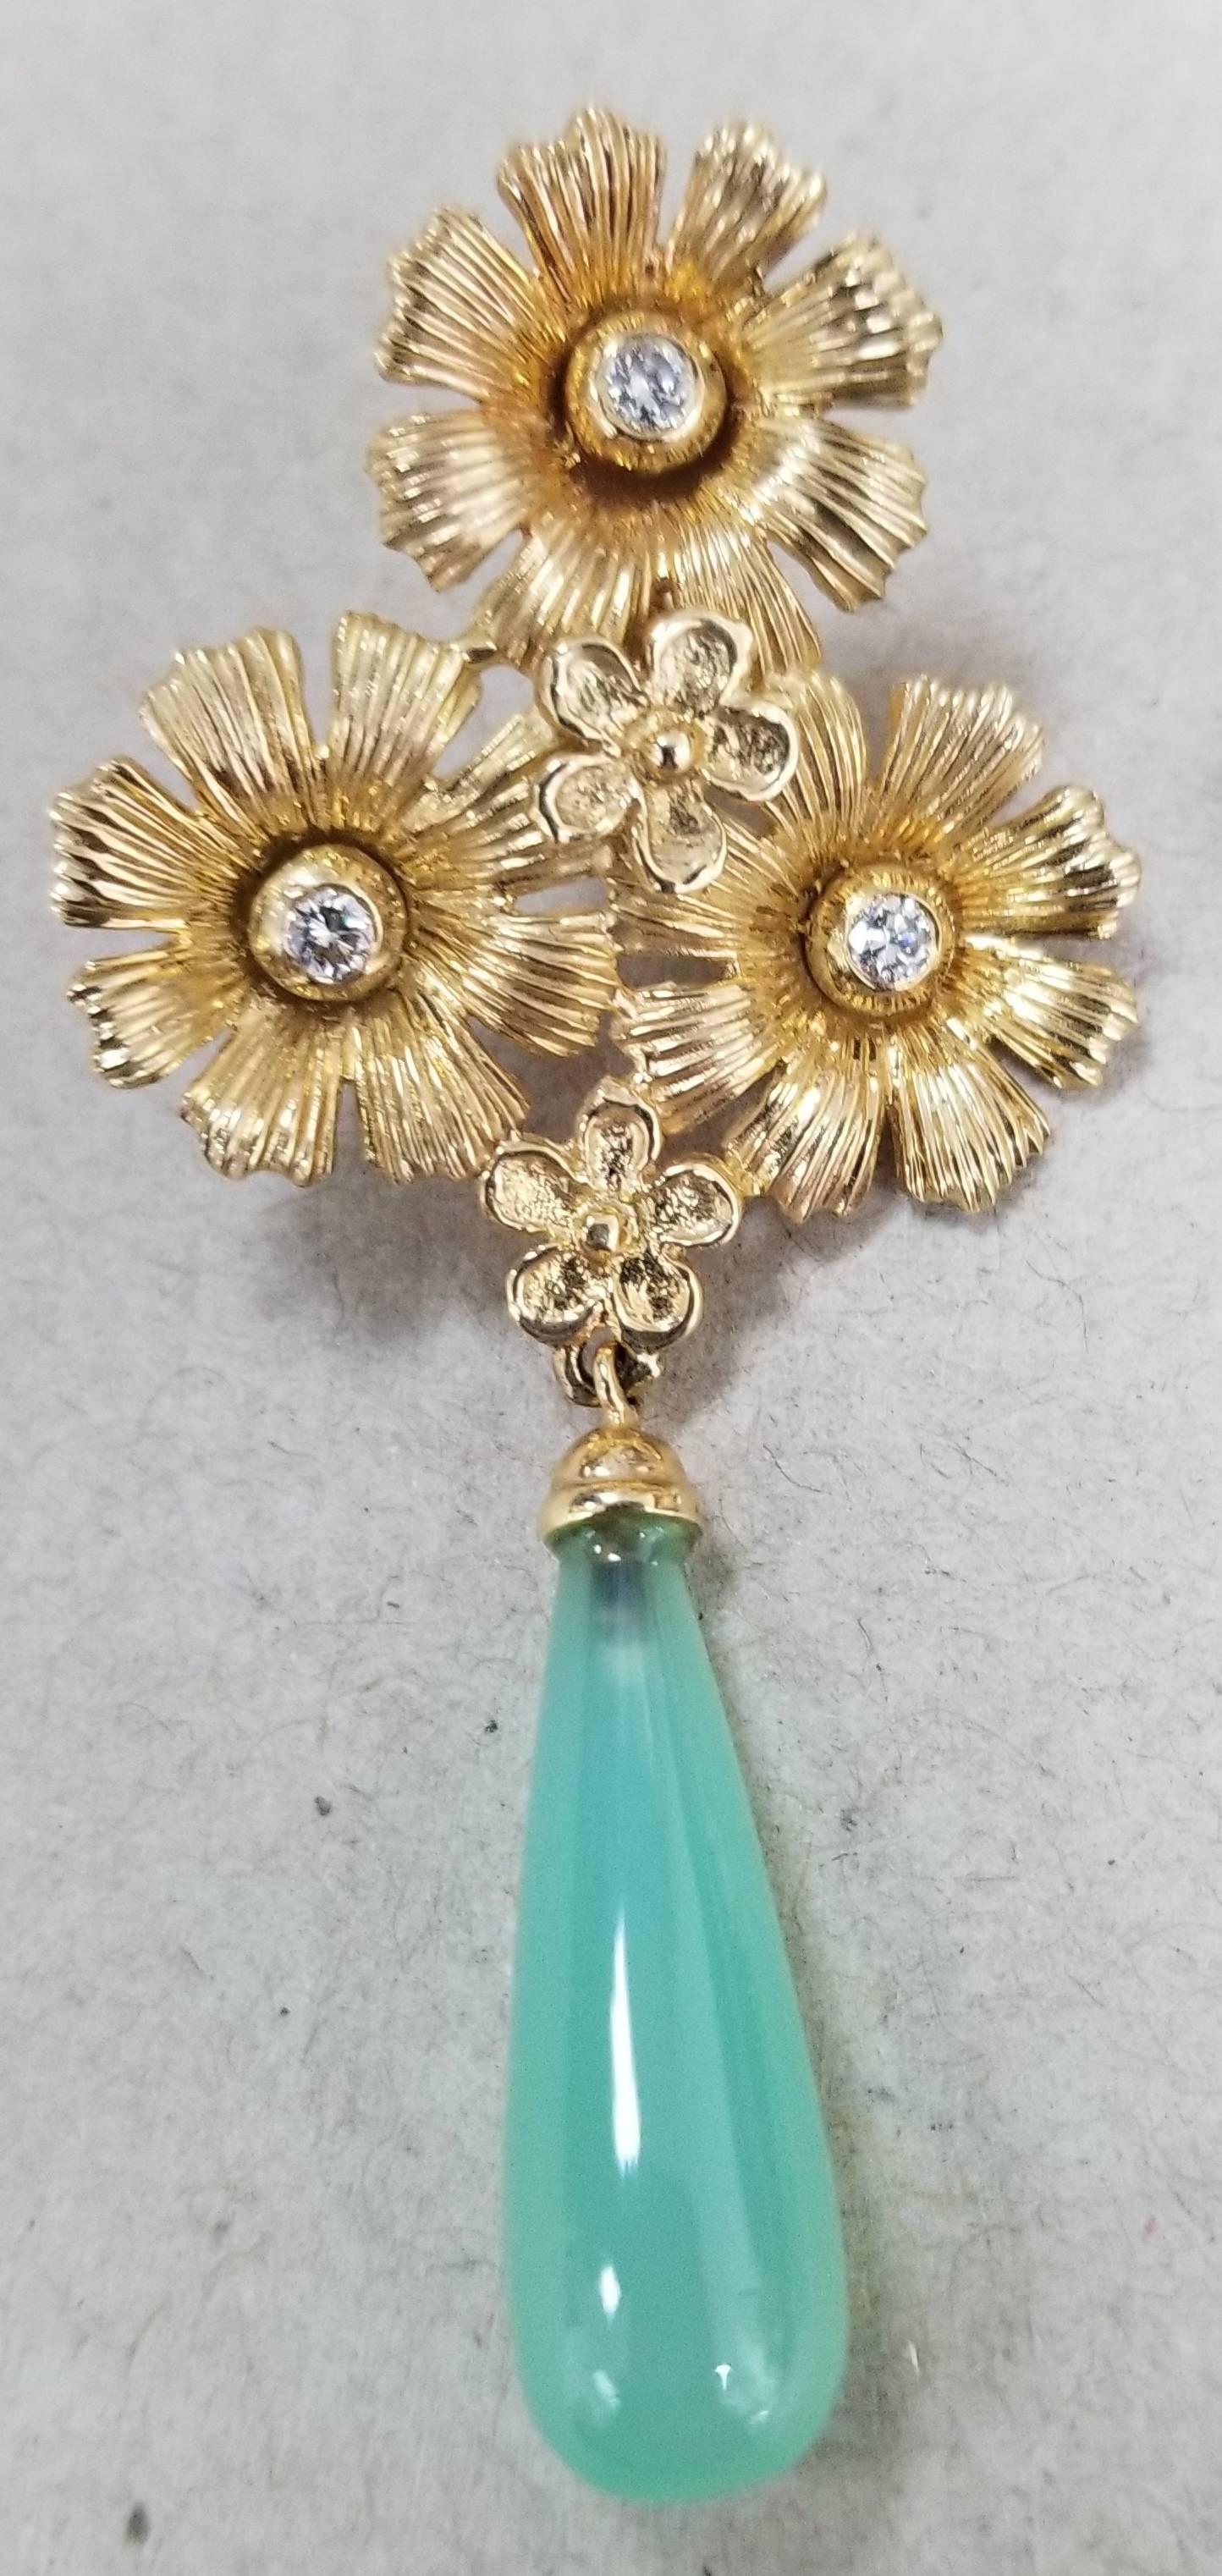 Round Cut 14 Karat Yellow Gold Flower Earrings with Diamonds and Chalcedony Drops